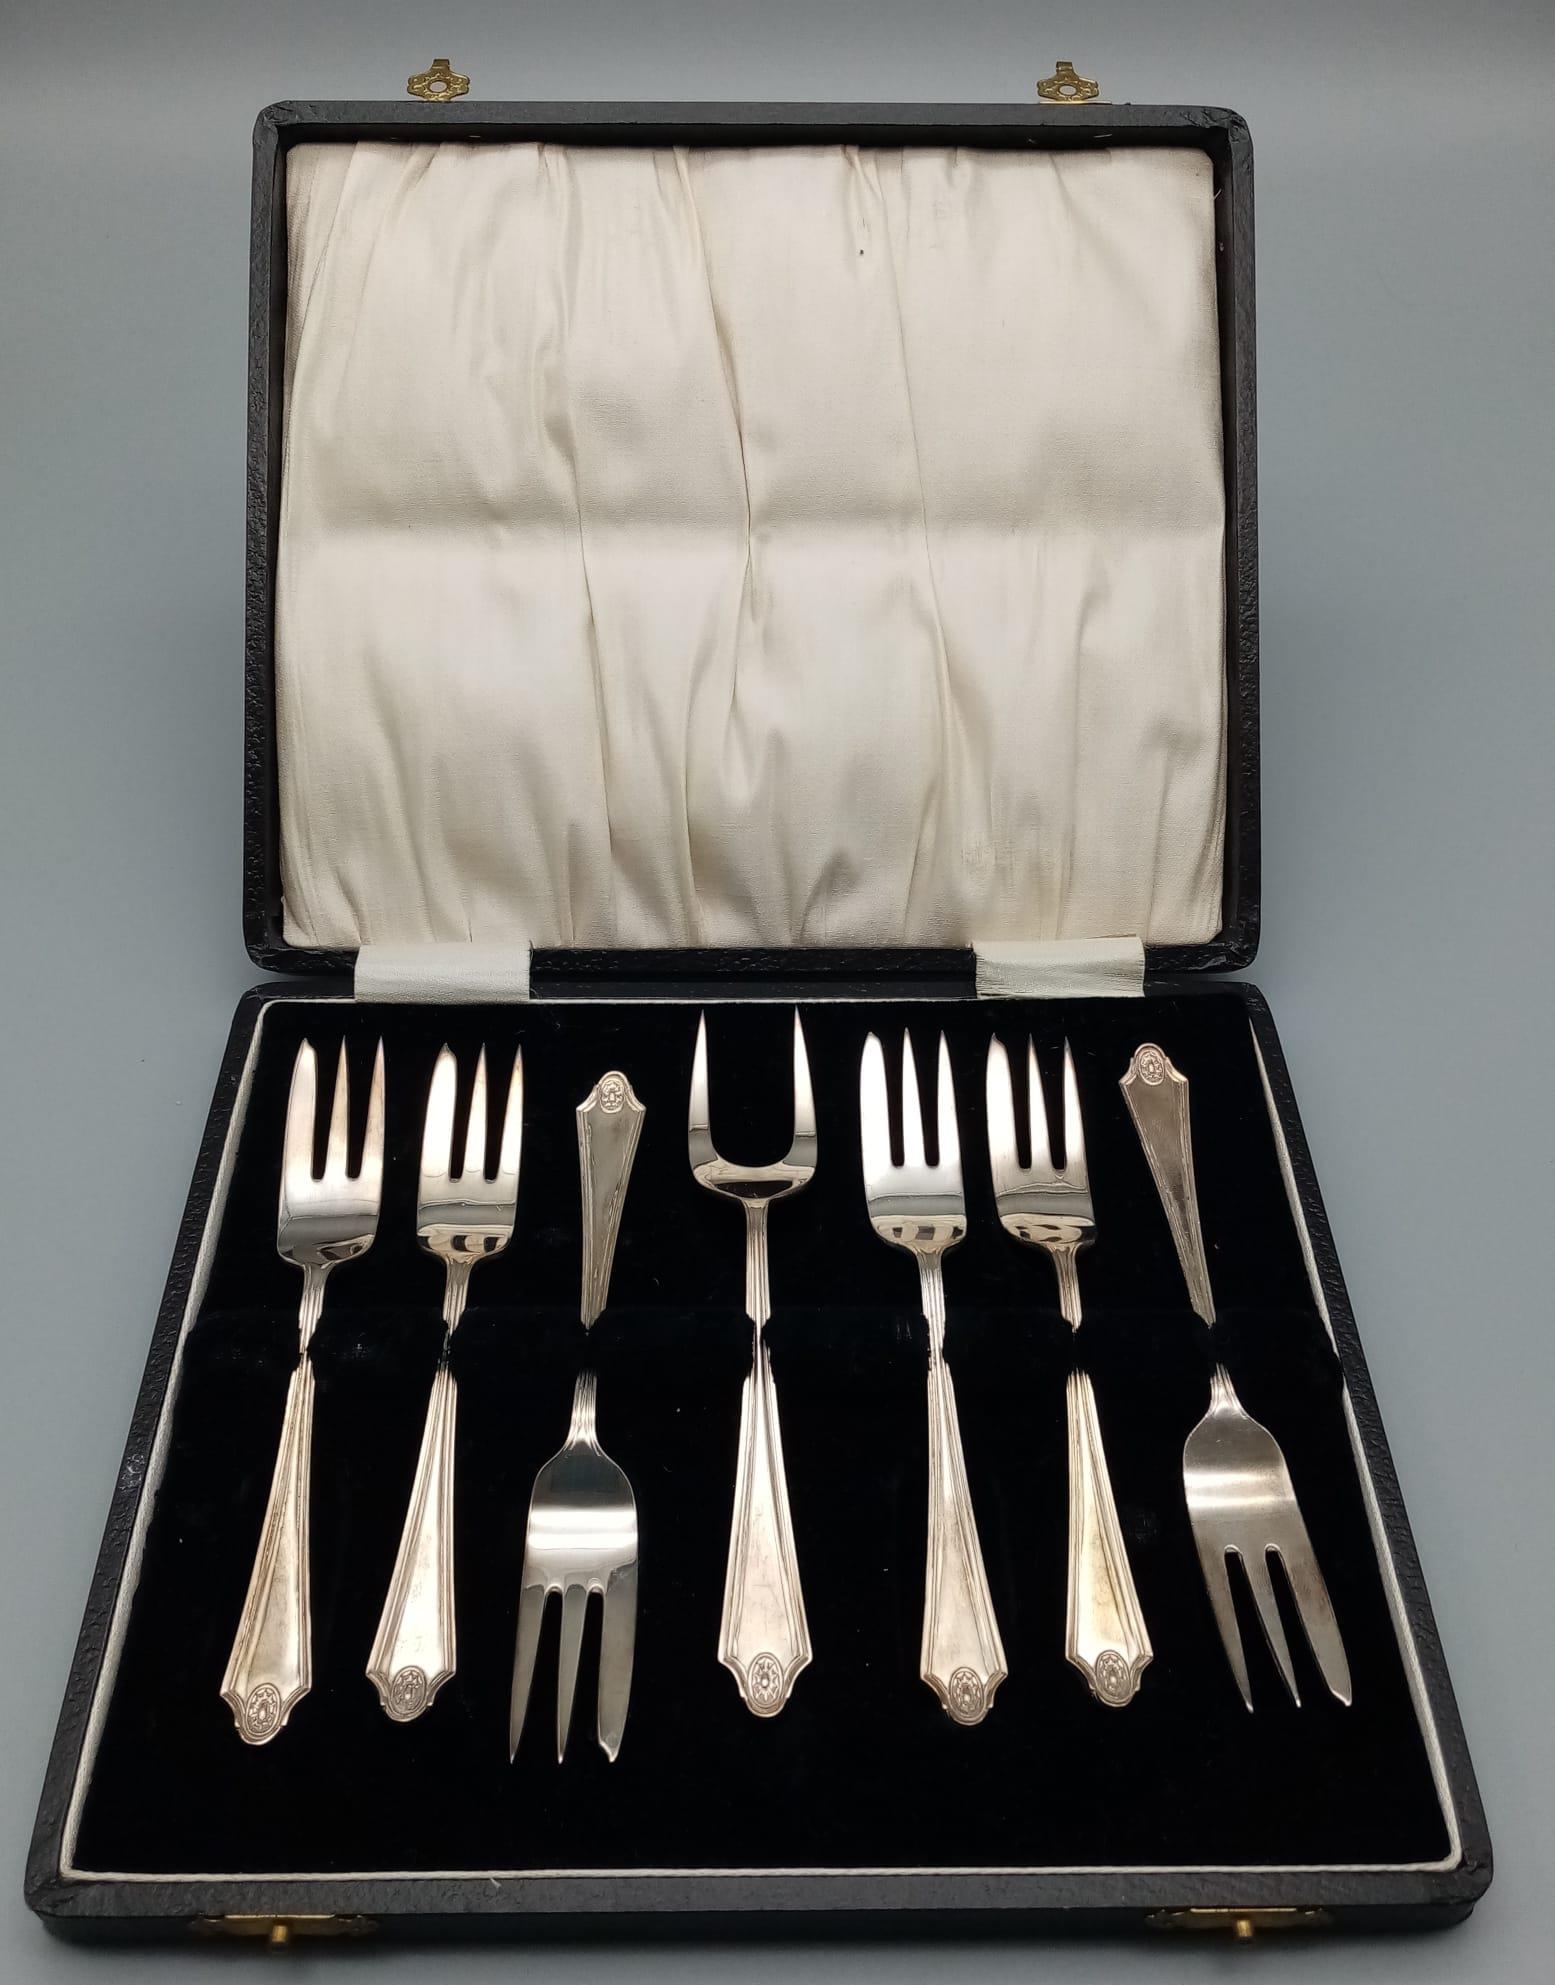 A Set of Six Pastry Desert Spoons with Serving Fork. Hallmarks for Birmingham 1928. 136g total